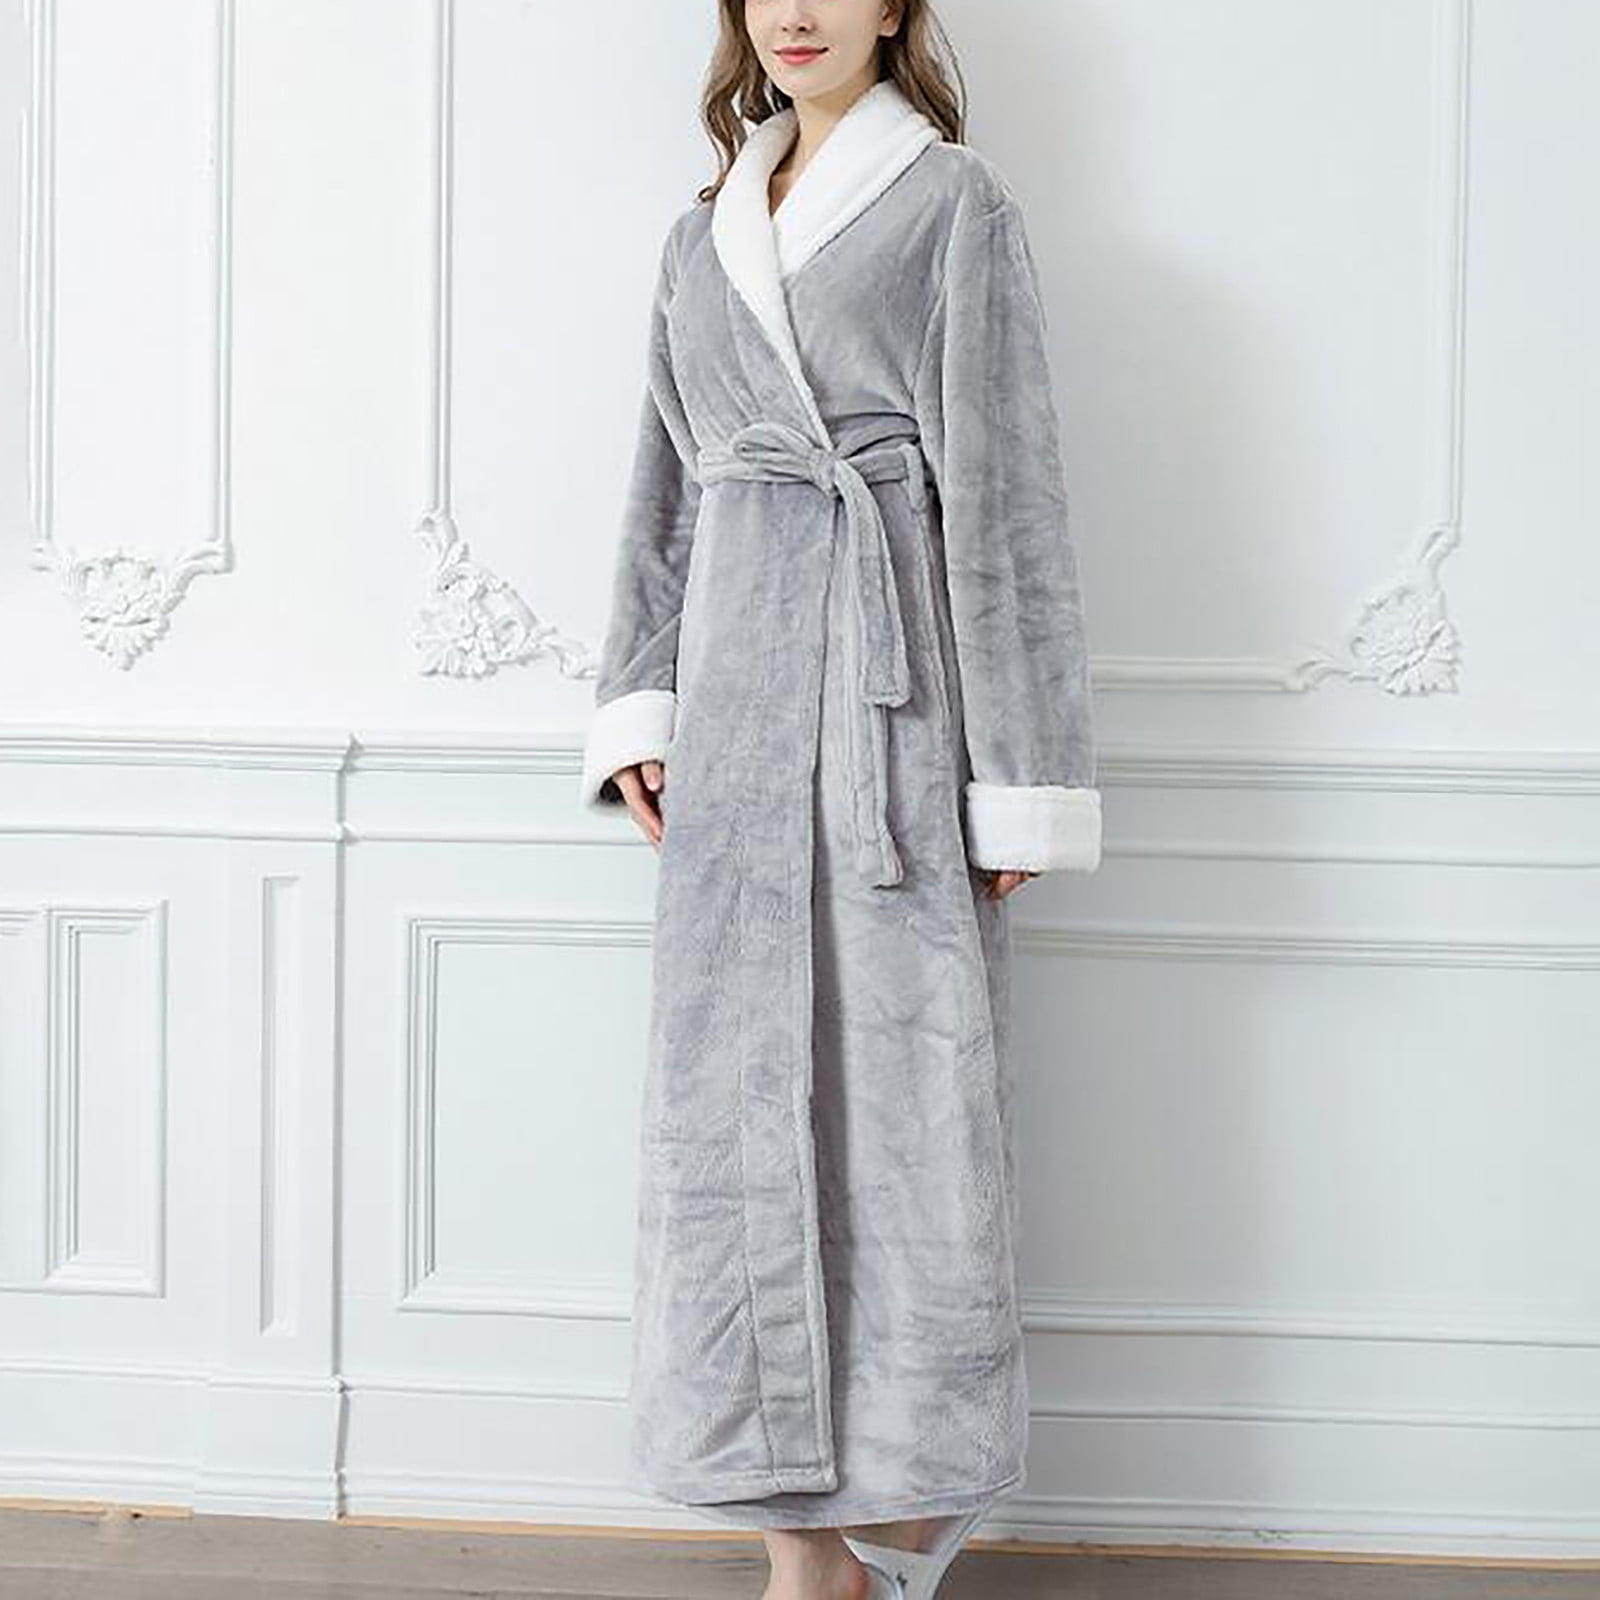 Luxury Hooded White Terry Towelling Dressing Gown - Egyptian Collection  Soft Cotton - The Towel Shop